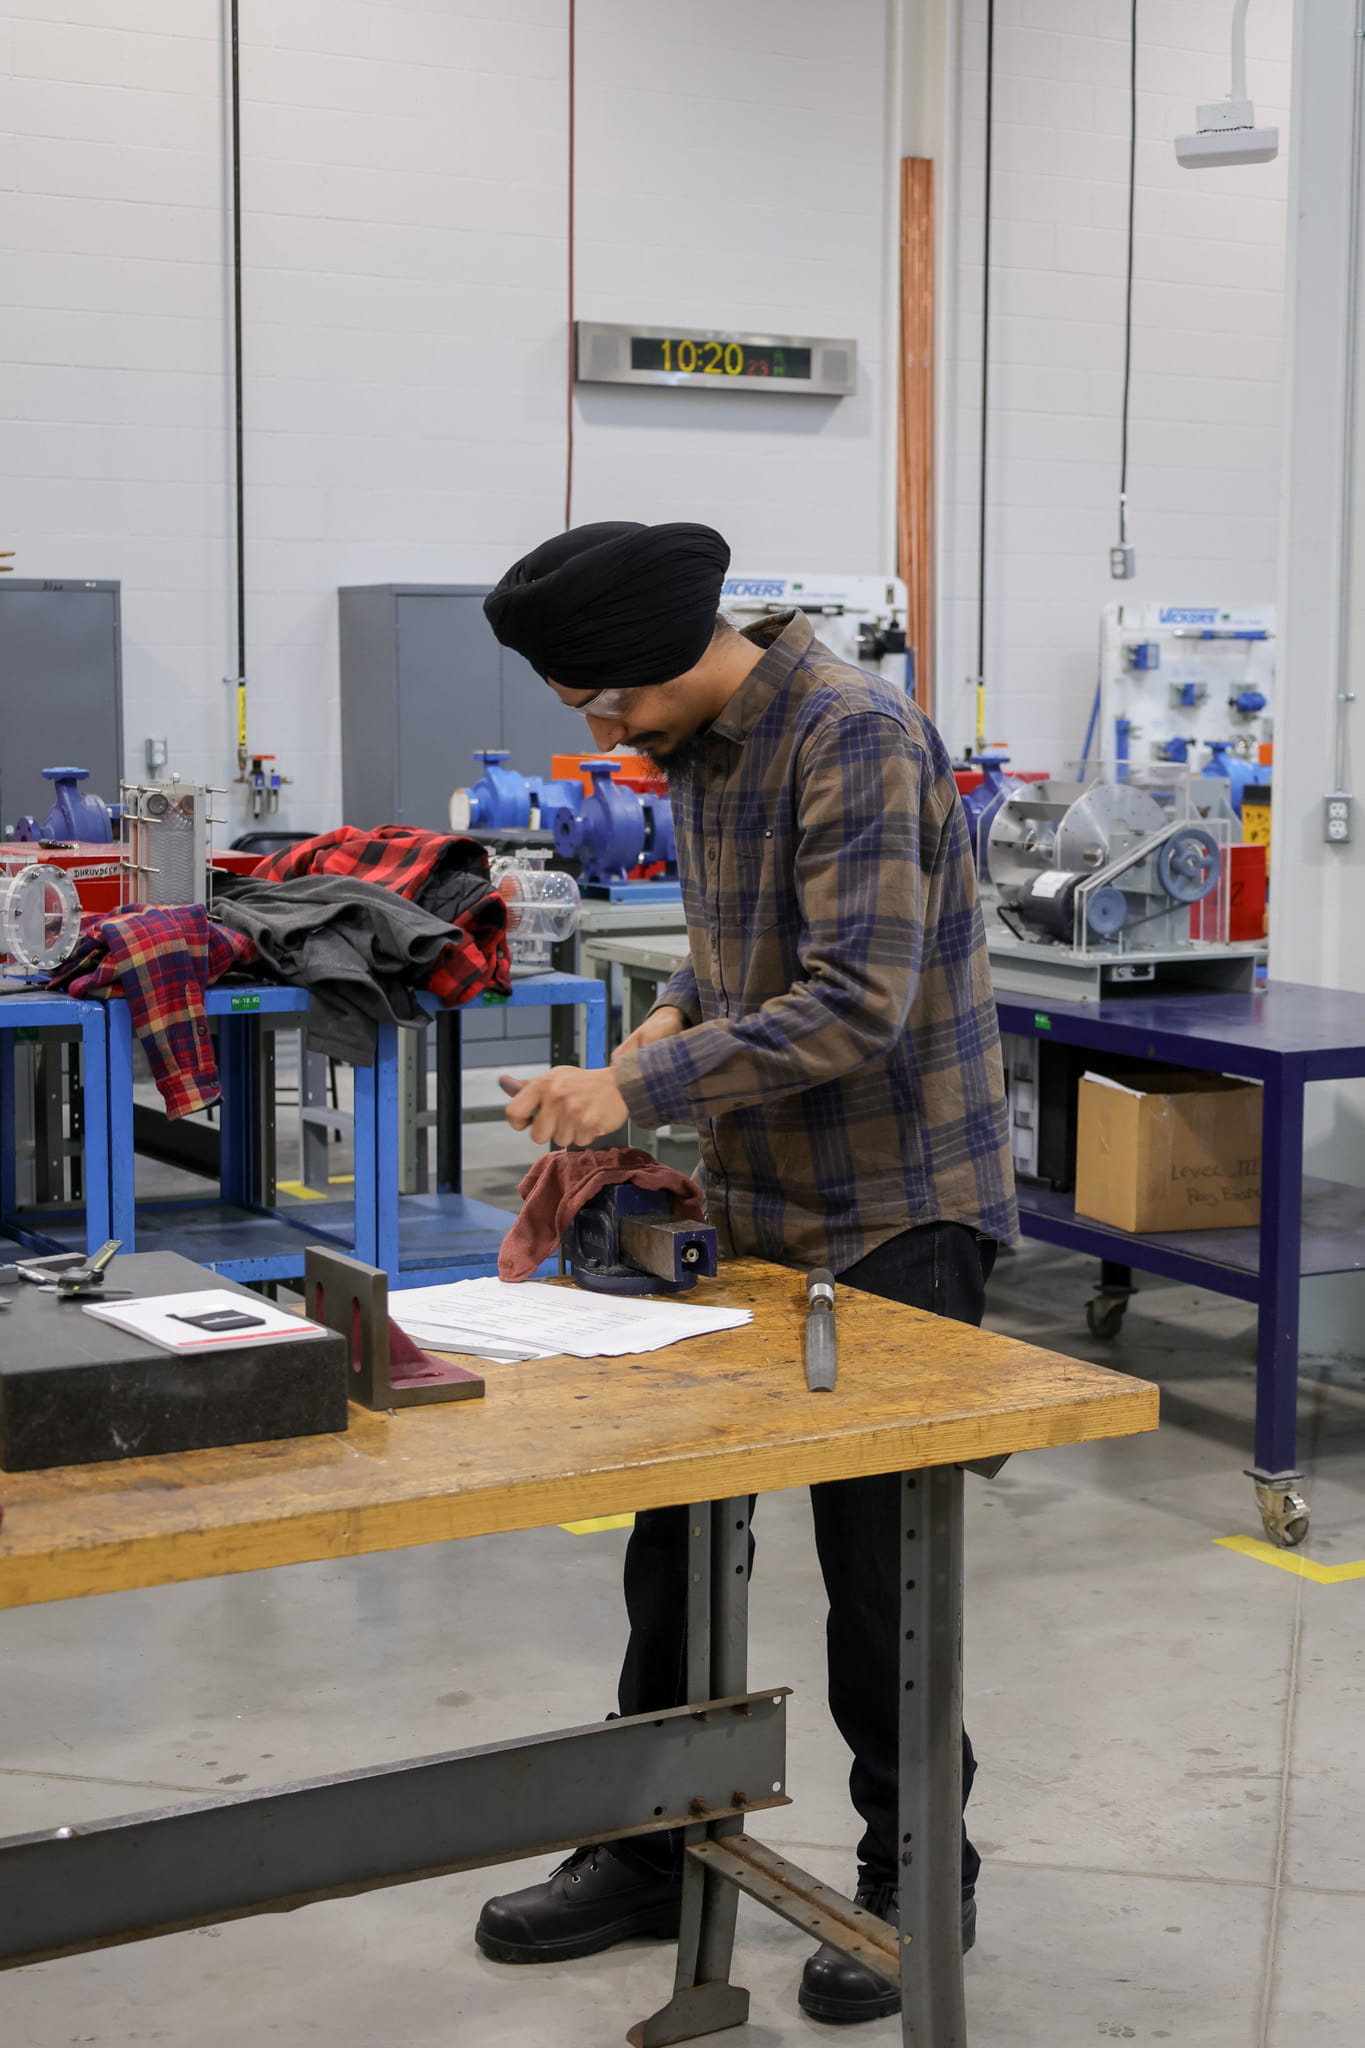 A student uses a work bench while competing in the Skills Sheridan event